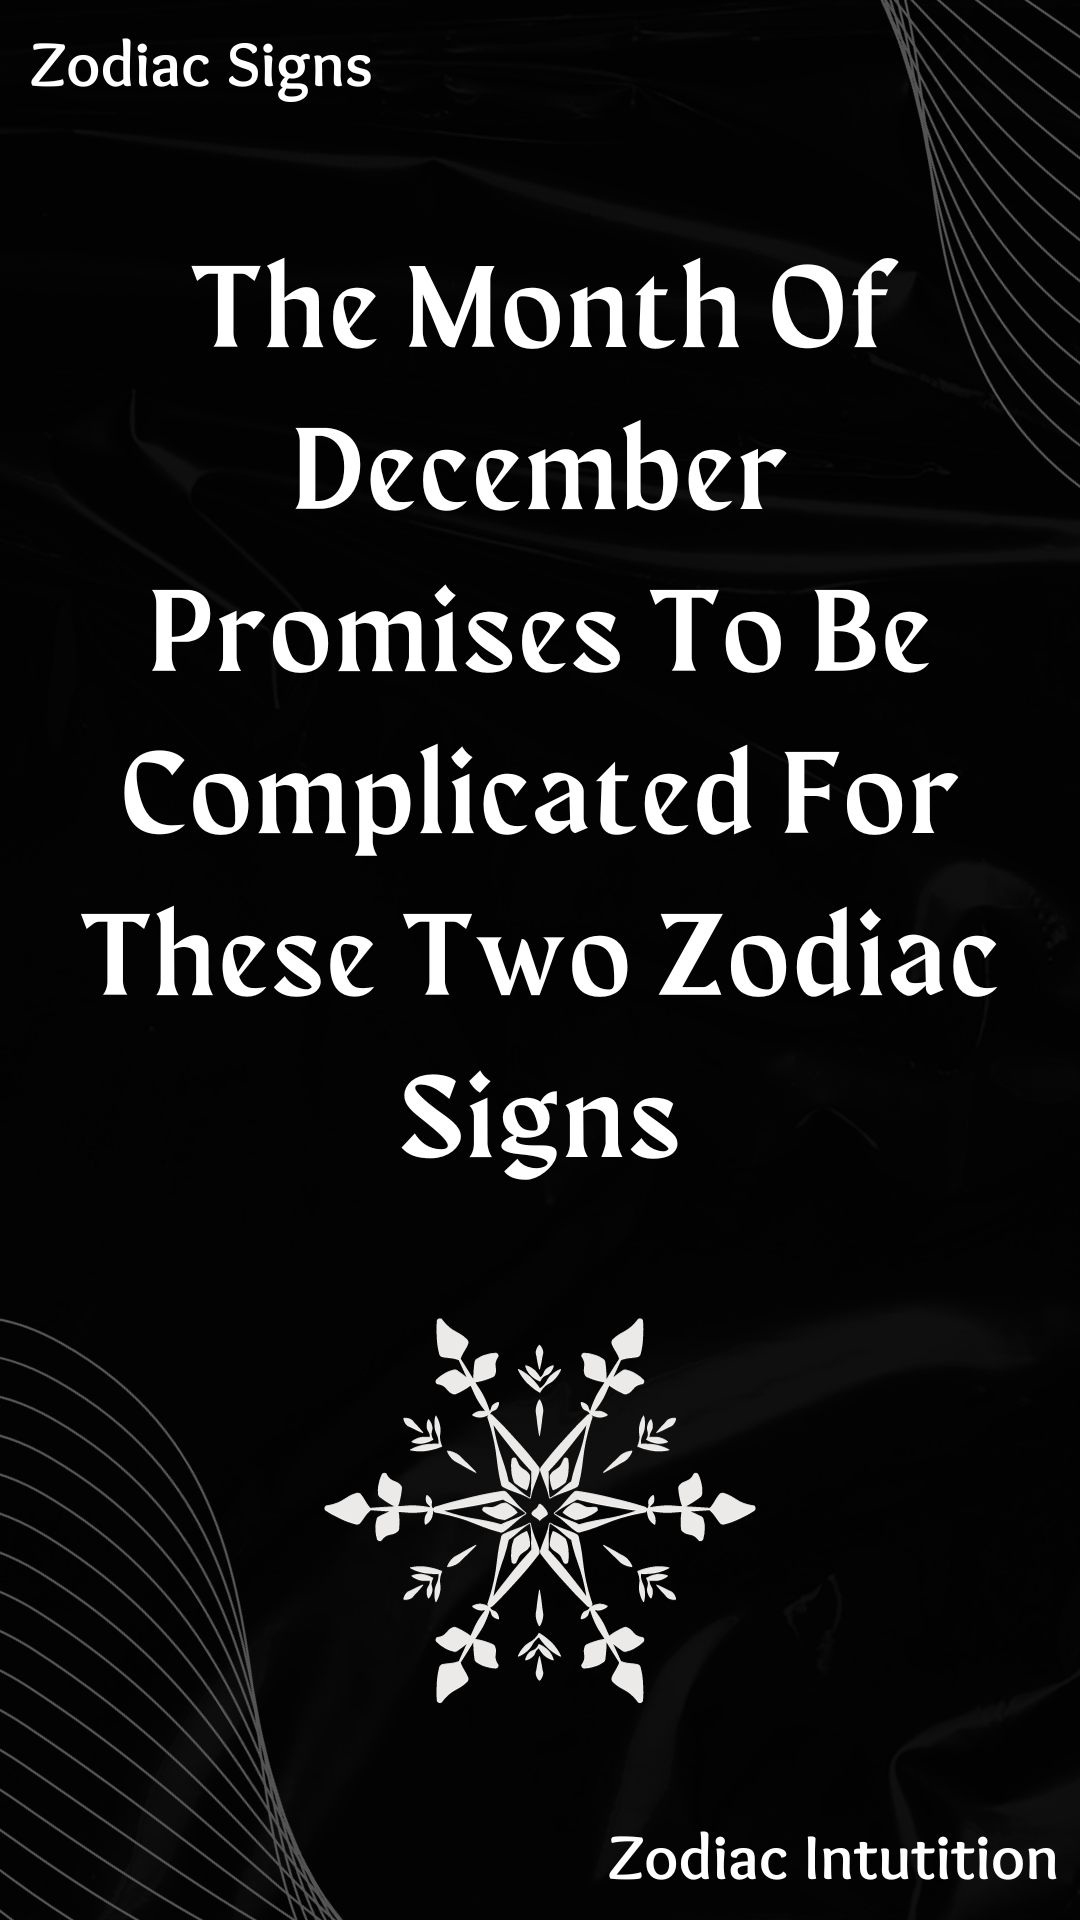 The Month Of December Promises To Be Complicated For These Two Zodiac Signs